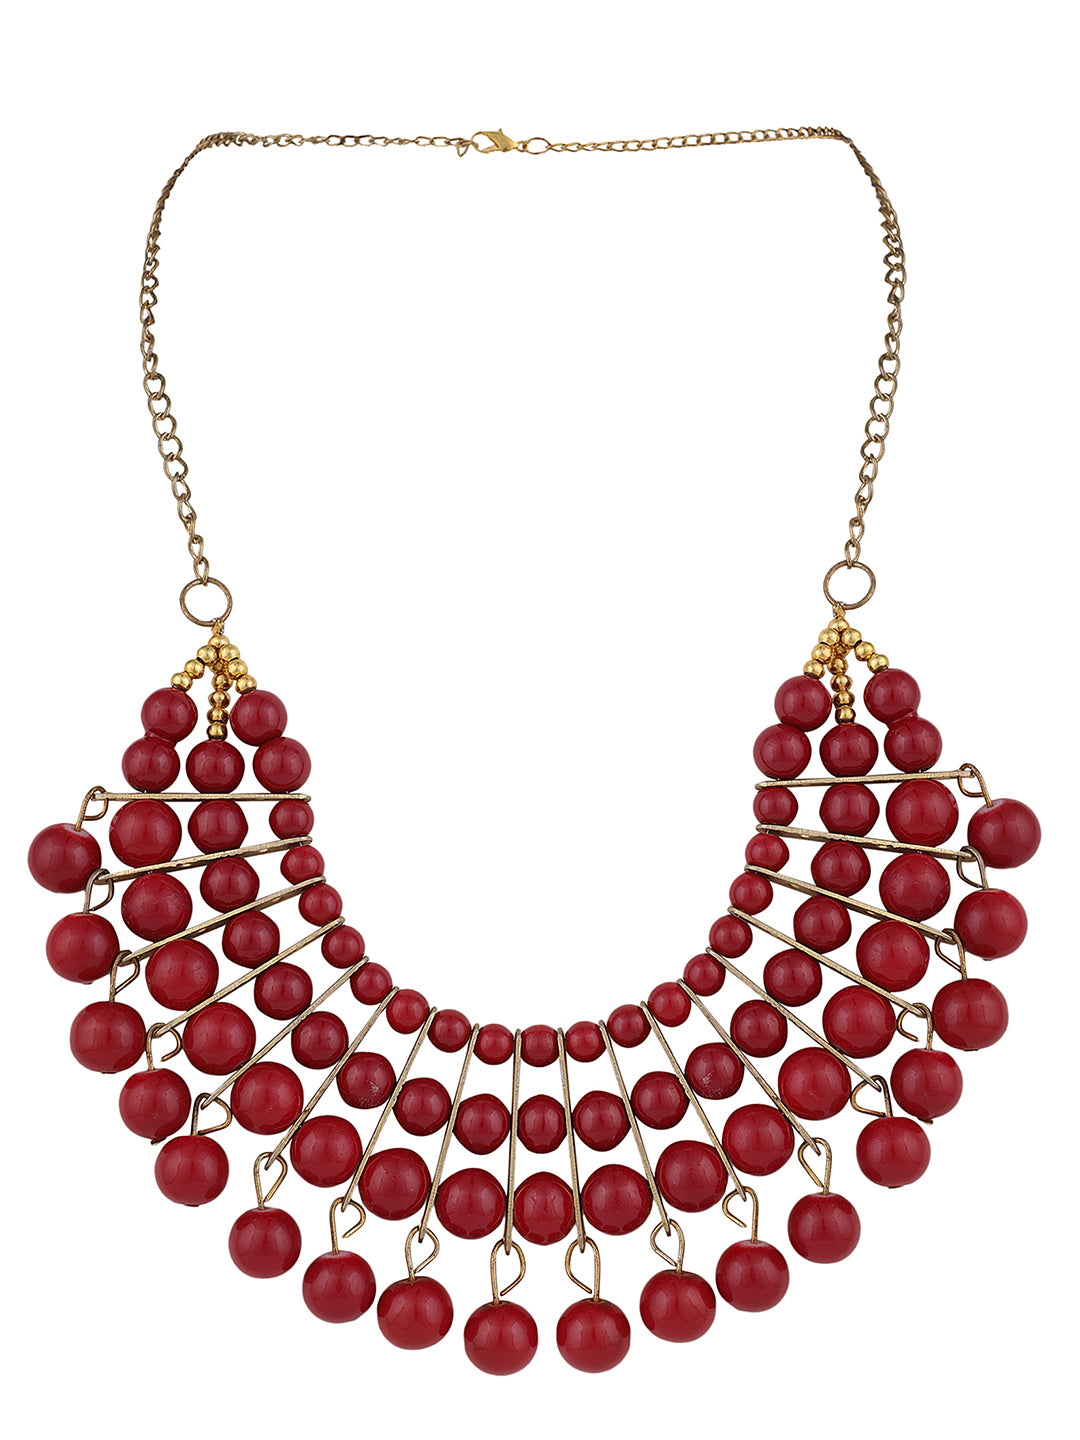 Women's Designer Red Bead Stacked Gold-Plated Collar Necklace - Anikas Creation